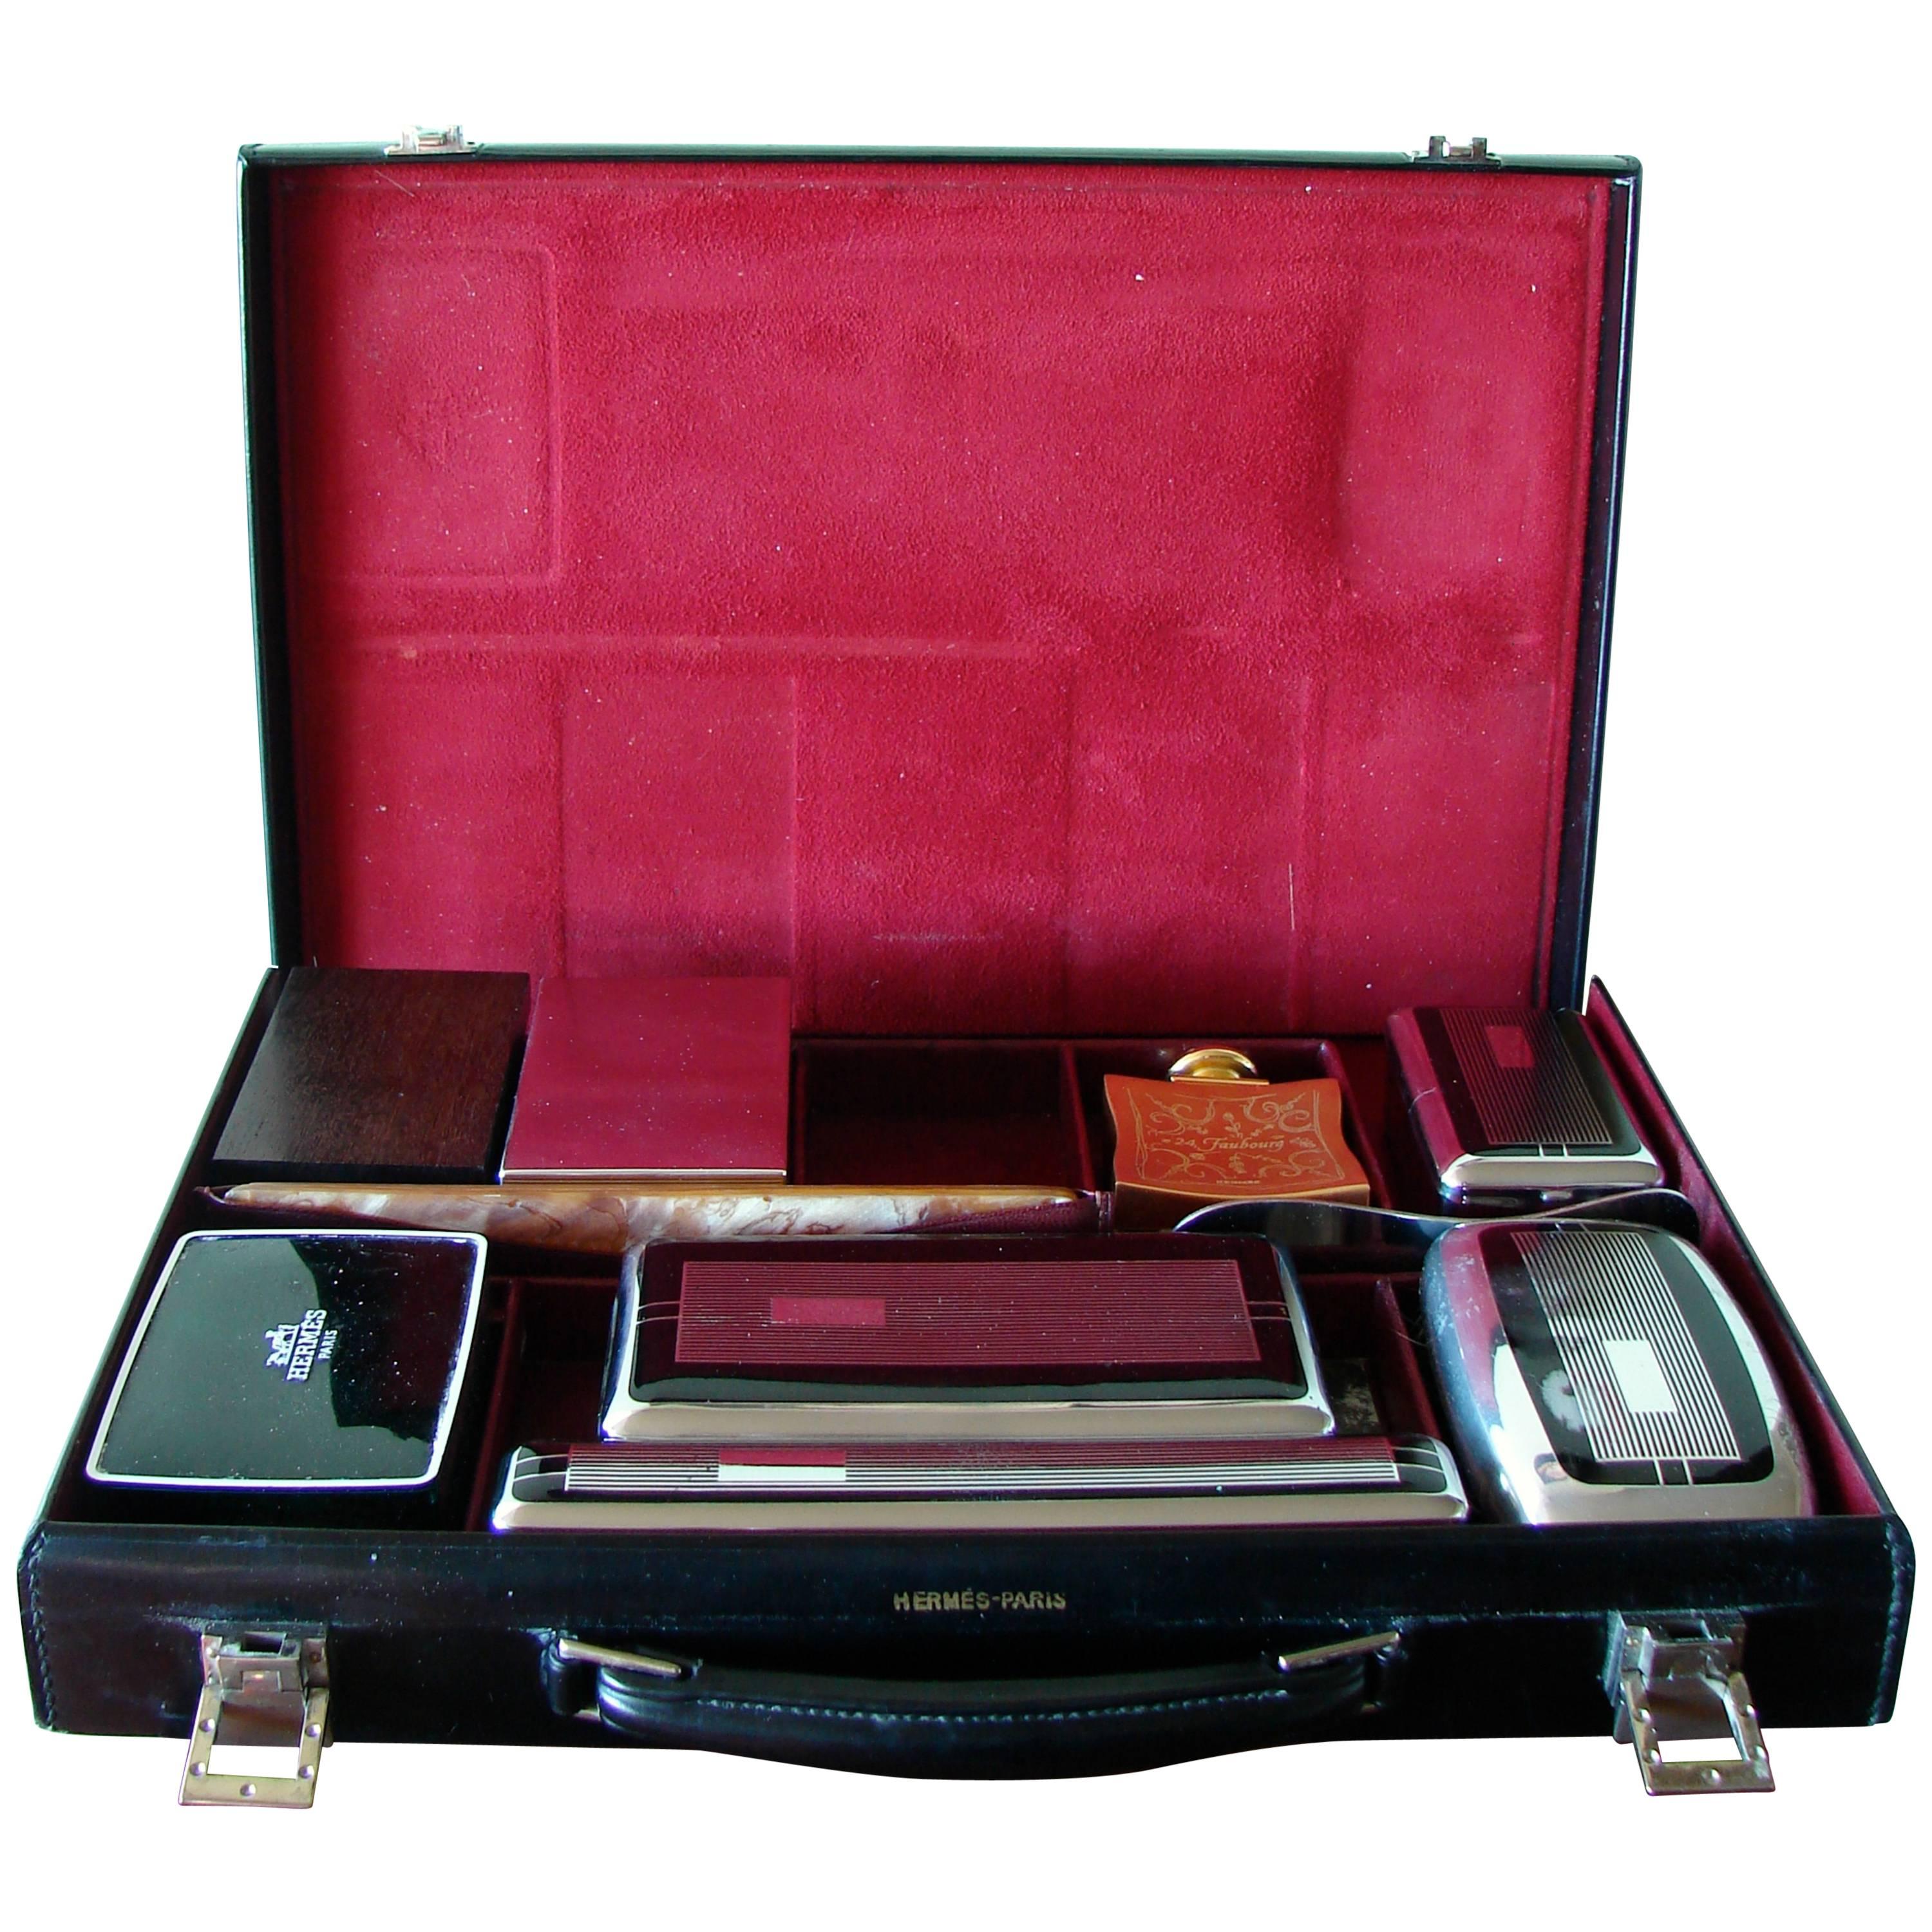 Exquisite Hermes Paris Black Box Leather Toiletry Case Grooming Kit 1930s 